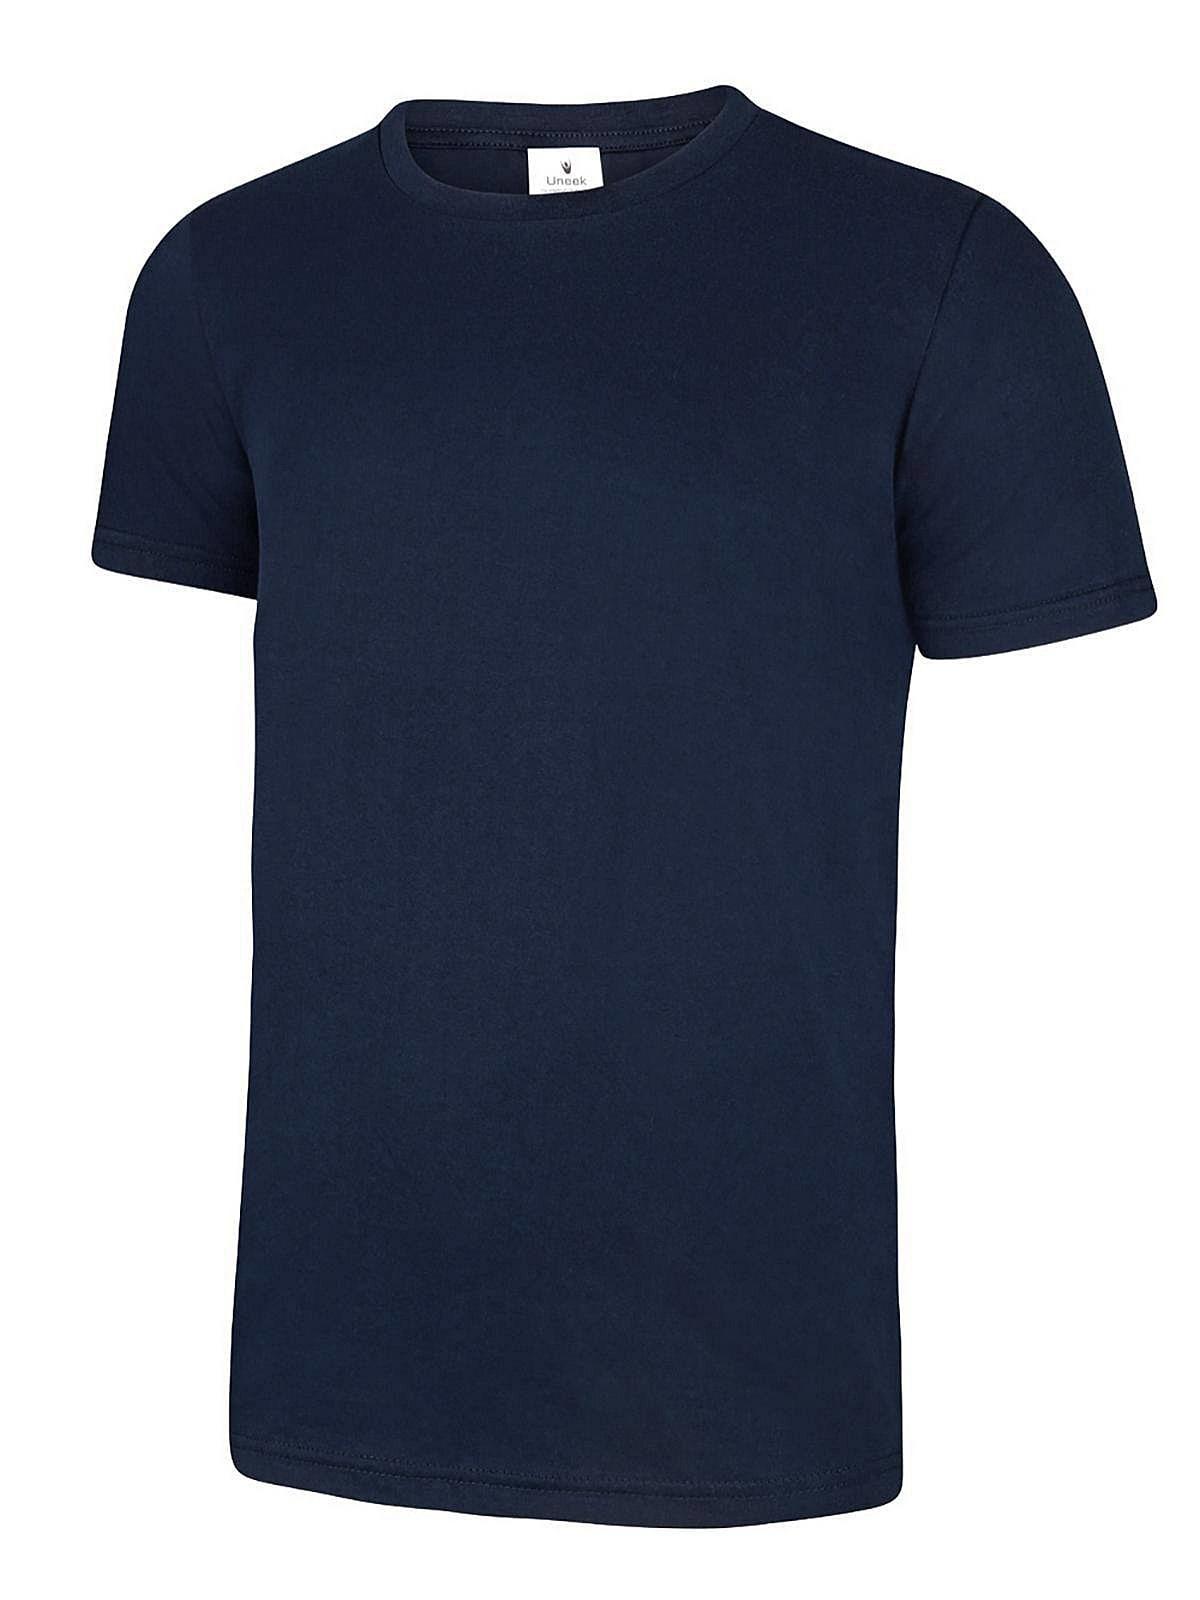 Uneek 150GSM Olympic T-Shirt in Navy (Product Code: UC320)